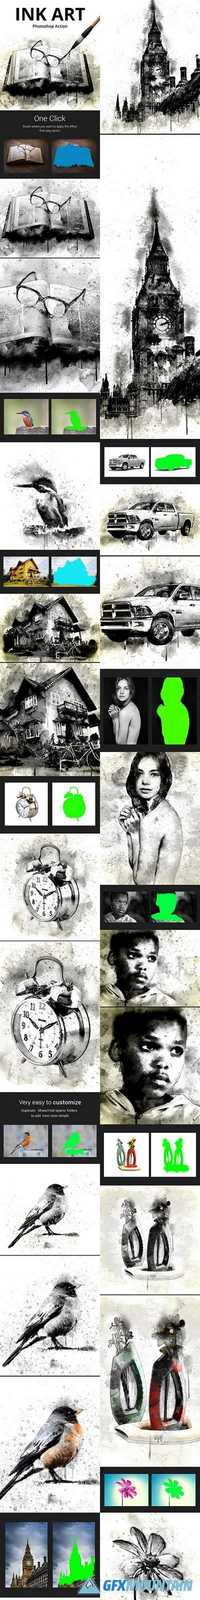 GraphicRiver - Ink Art Photoshop Action - 17622038